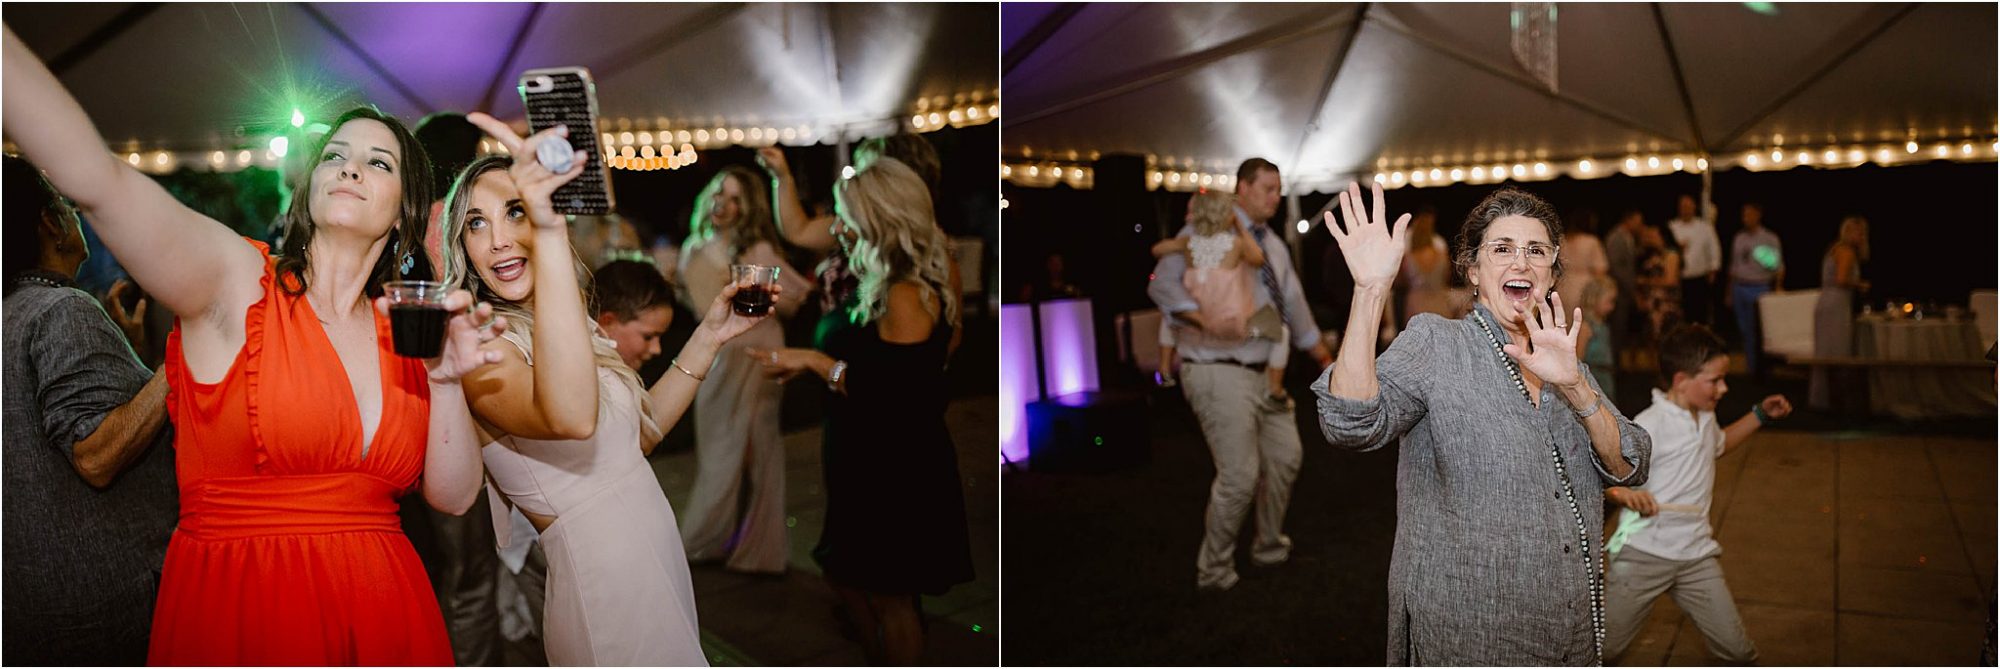 dancing photos at reception at The Quarry Venue Knoxville